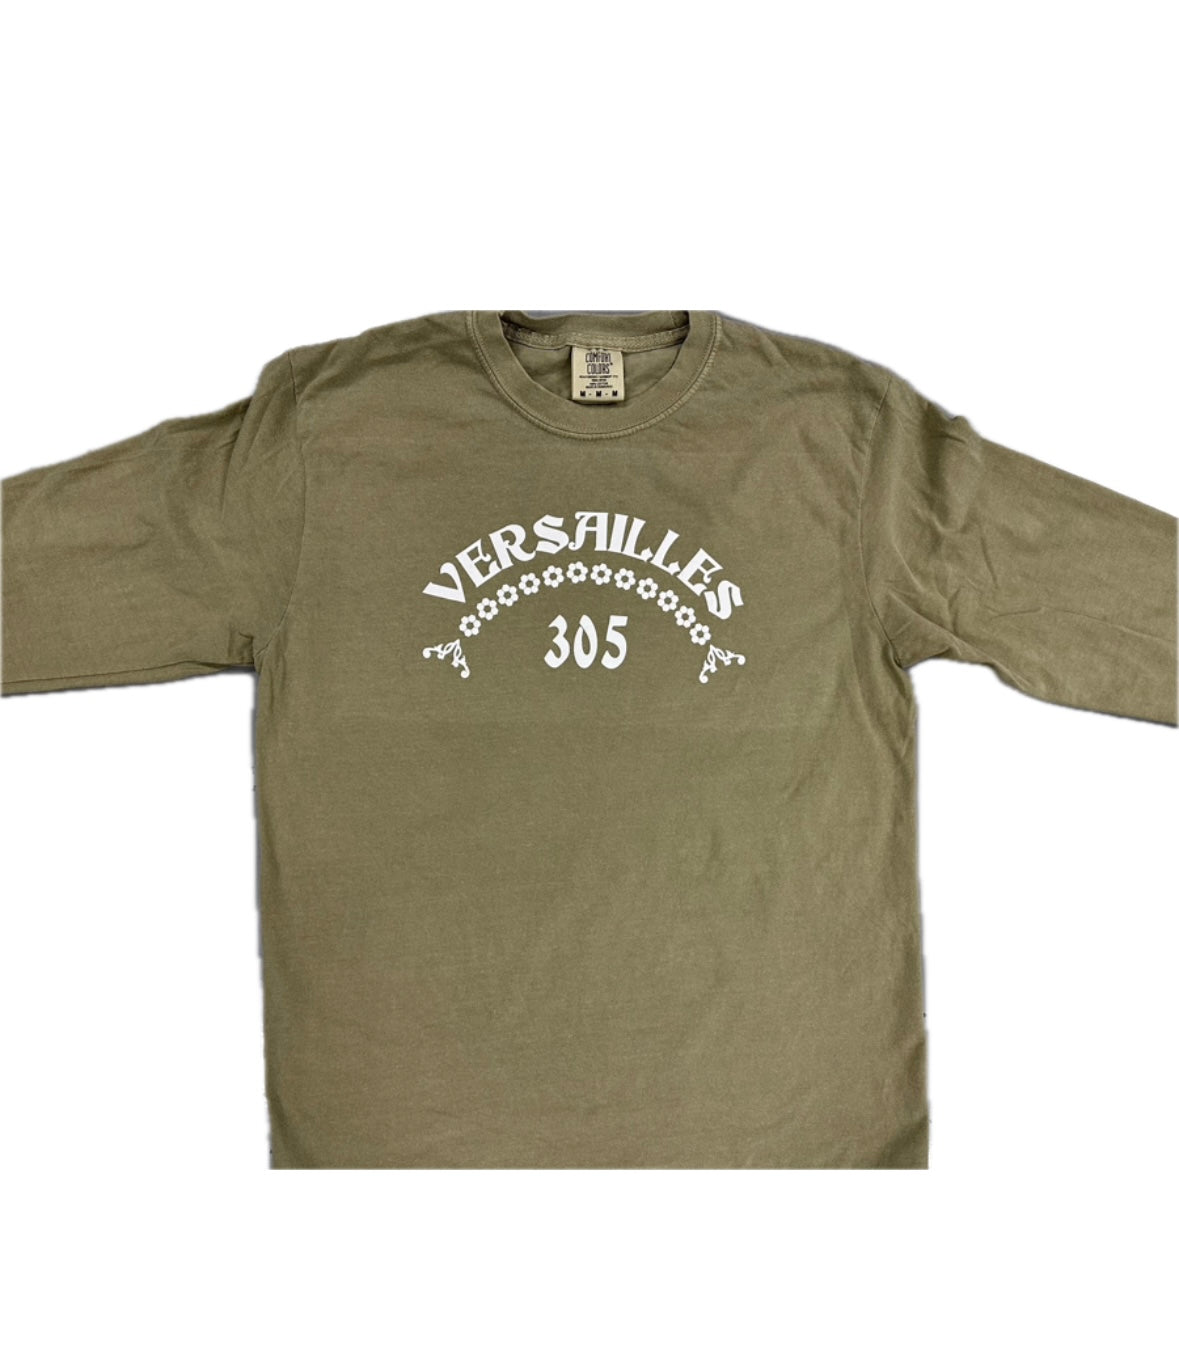 305 DAY: Versailles 305 Long Sleeve